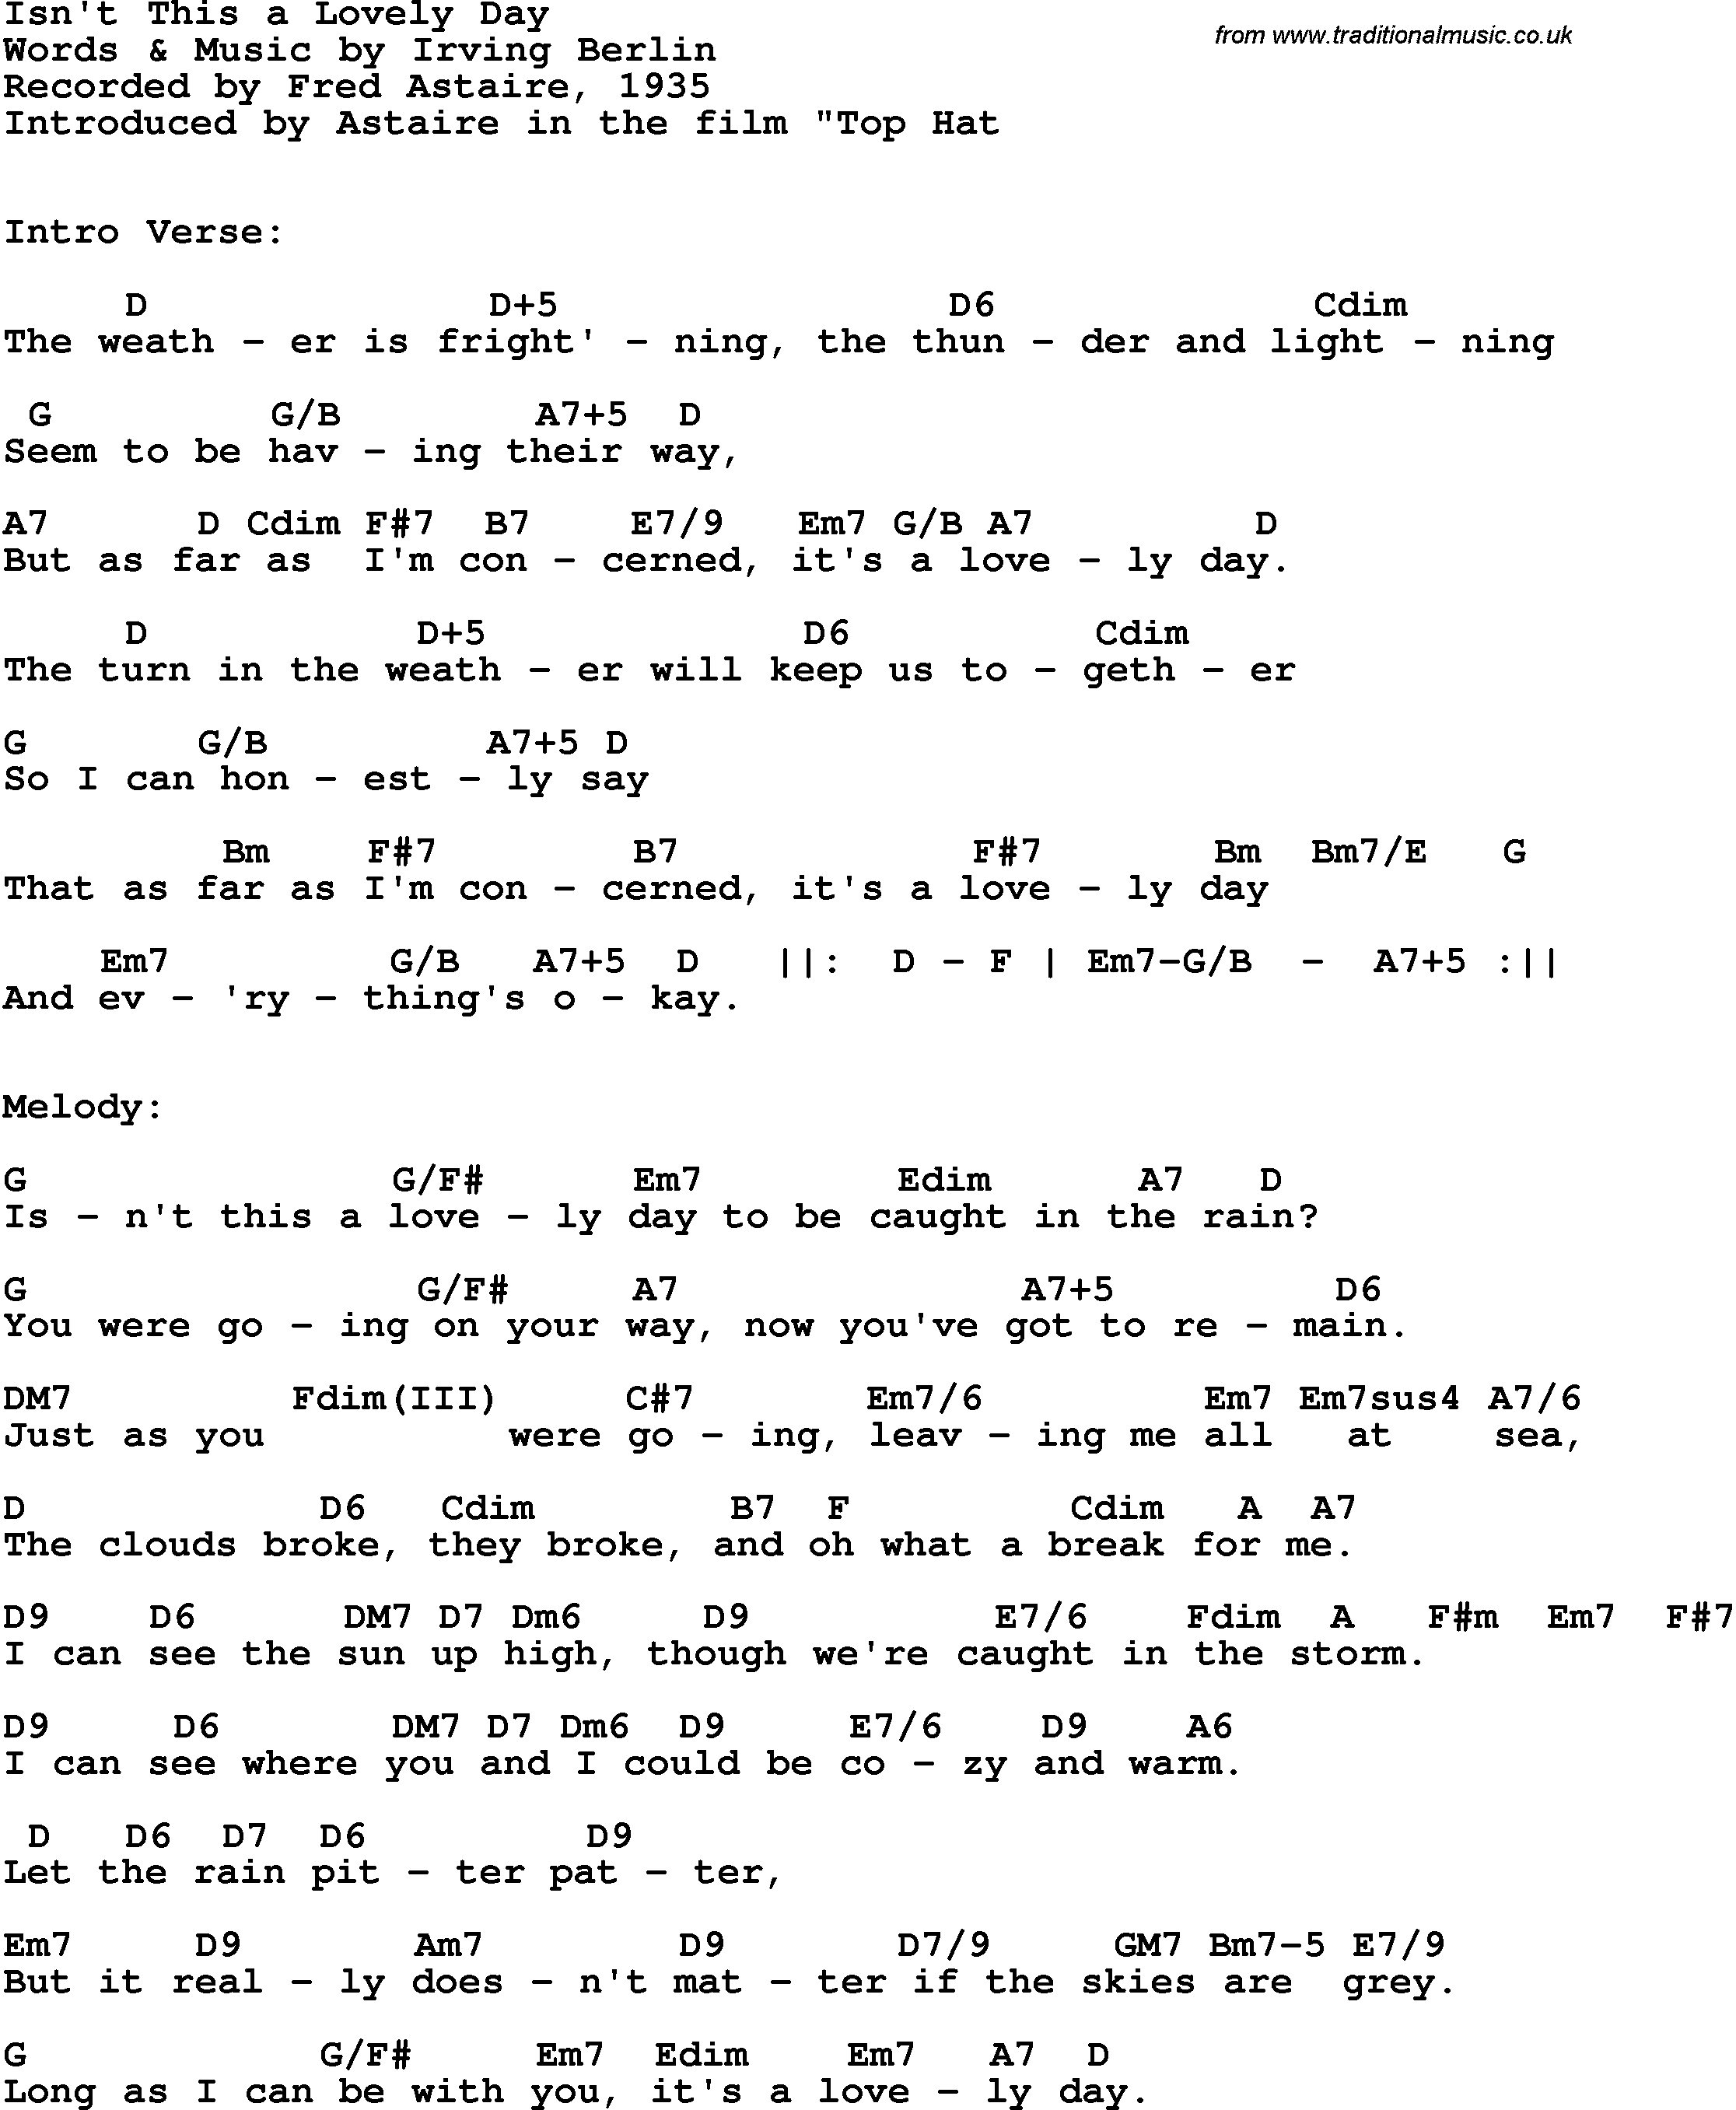 Song Lyrics with guitar chords for Isn't This A Lovely Day - Fred Astaire, 1935